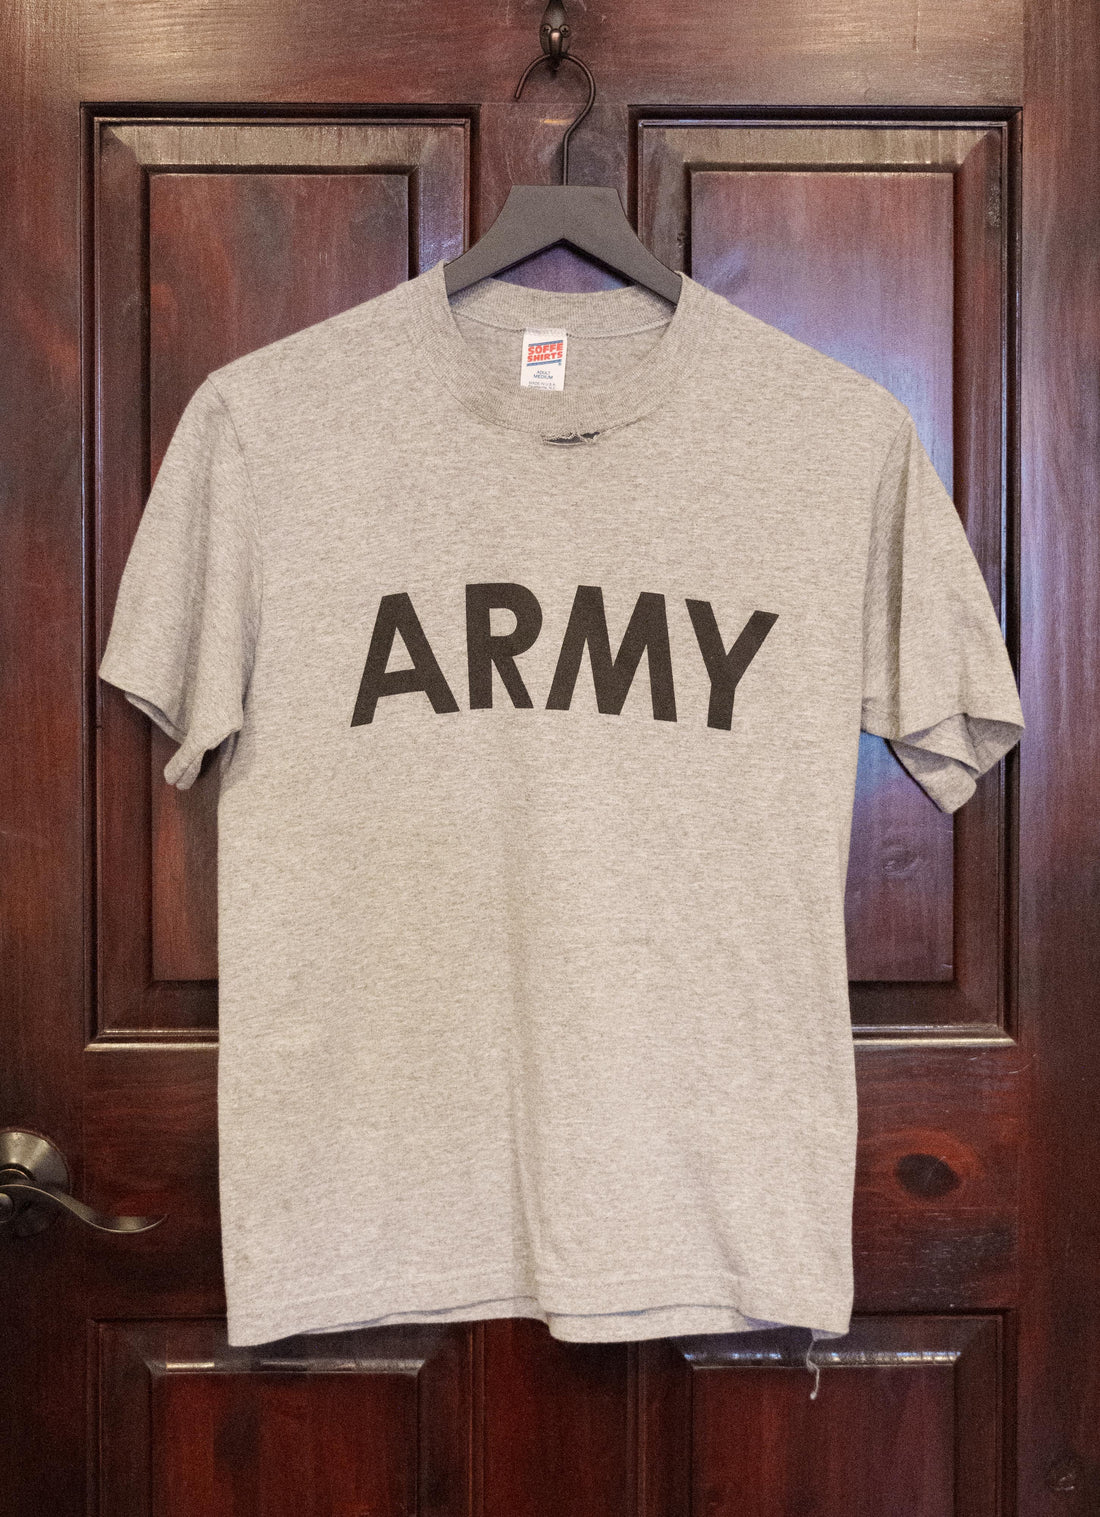 Vintage Army T-Shirt | Rare Finds